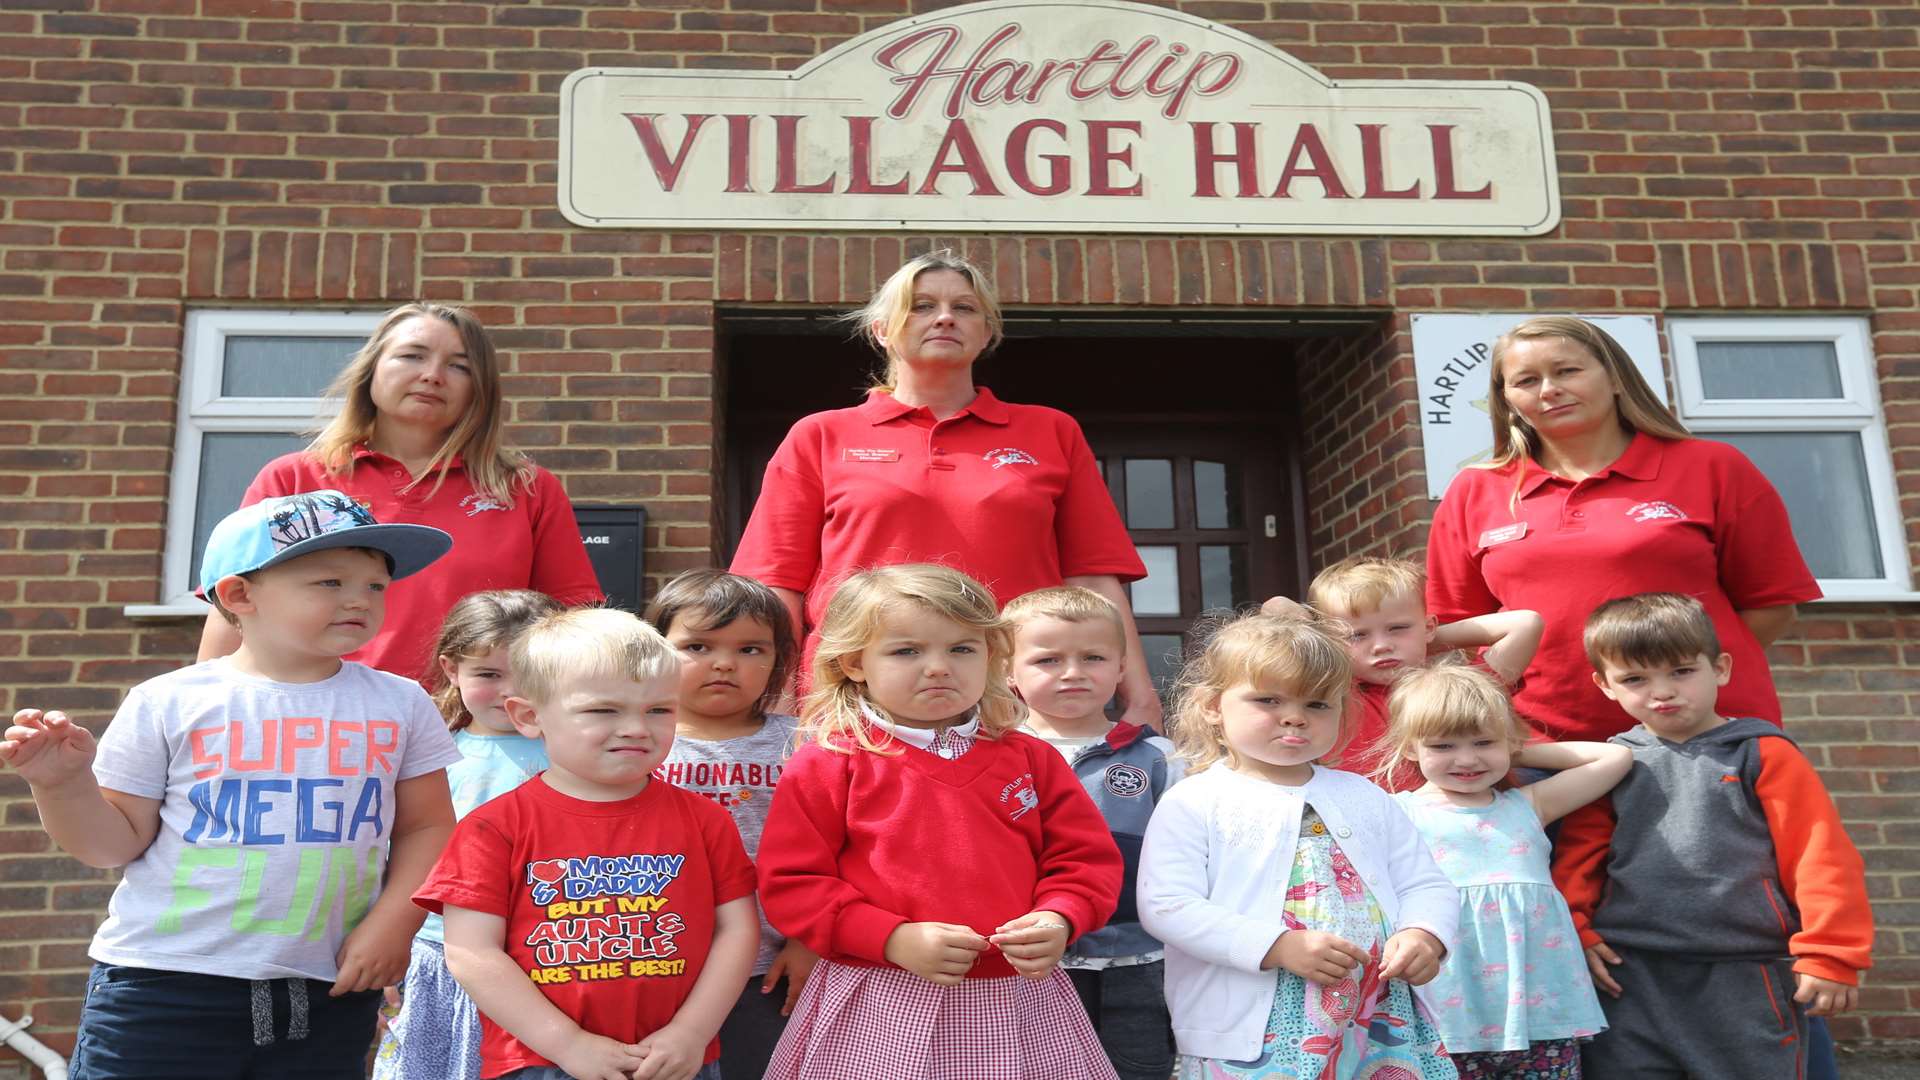 Gaynor Swan, Donna Brazier and Amanda Tindall with some of the children at Hartlip Pre-school